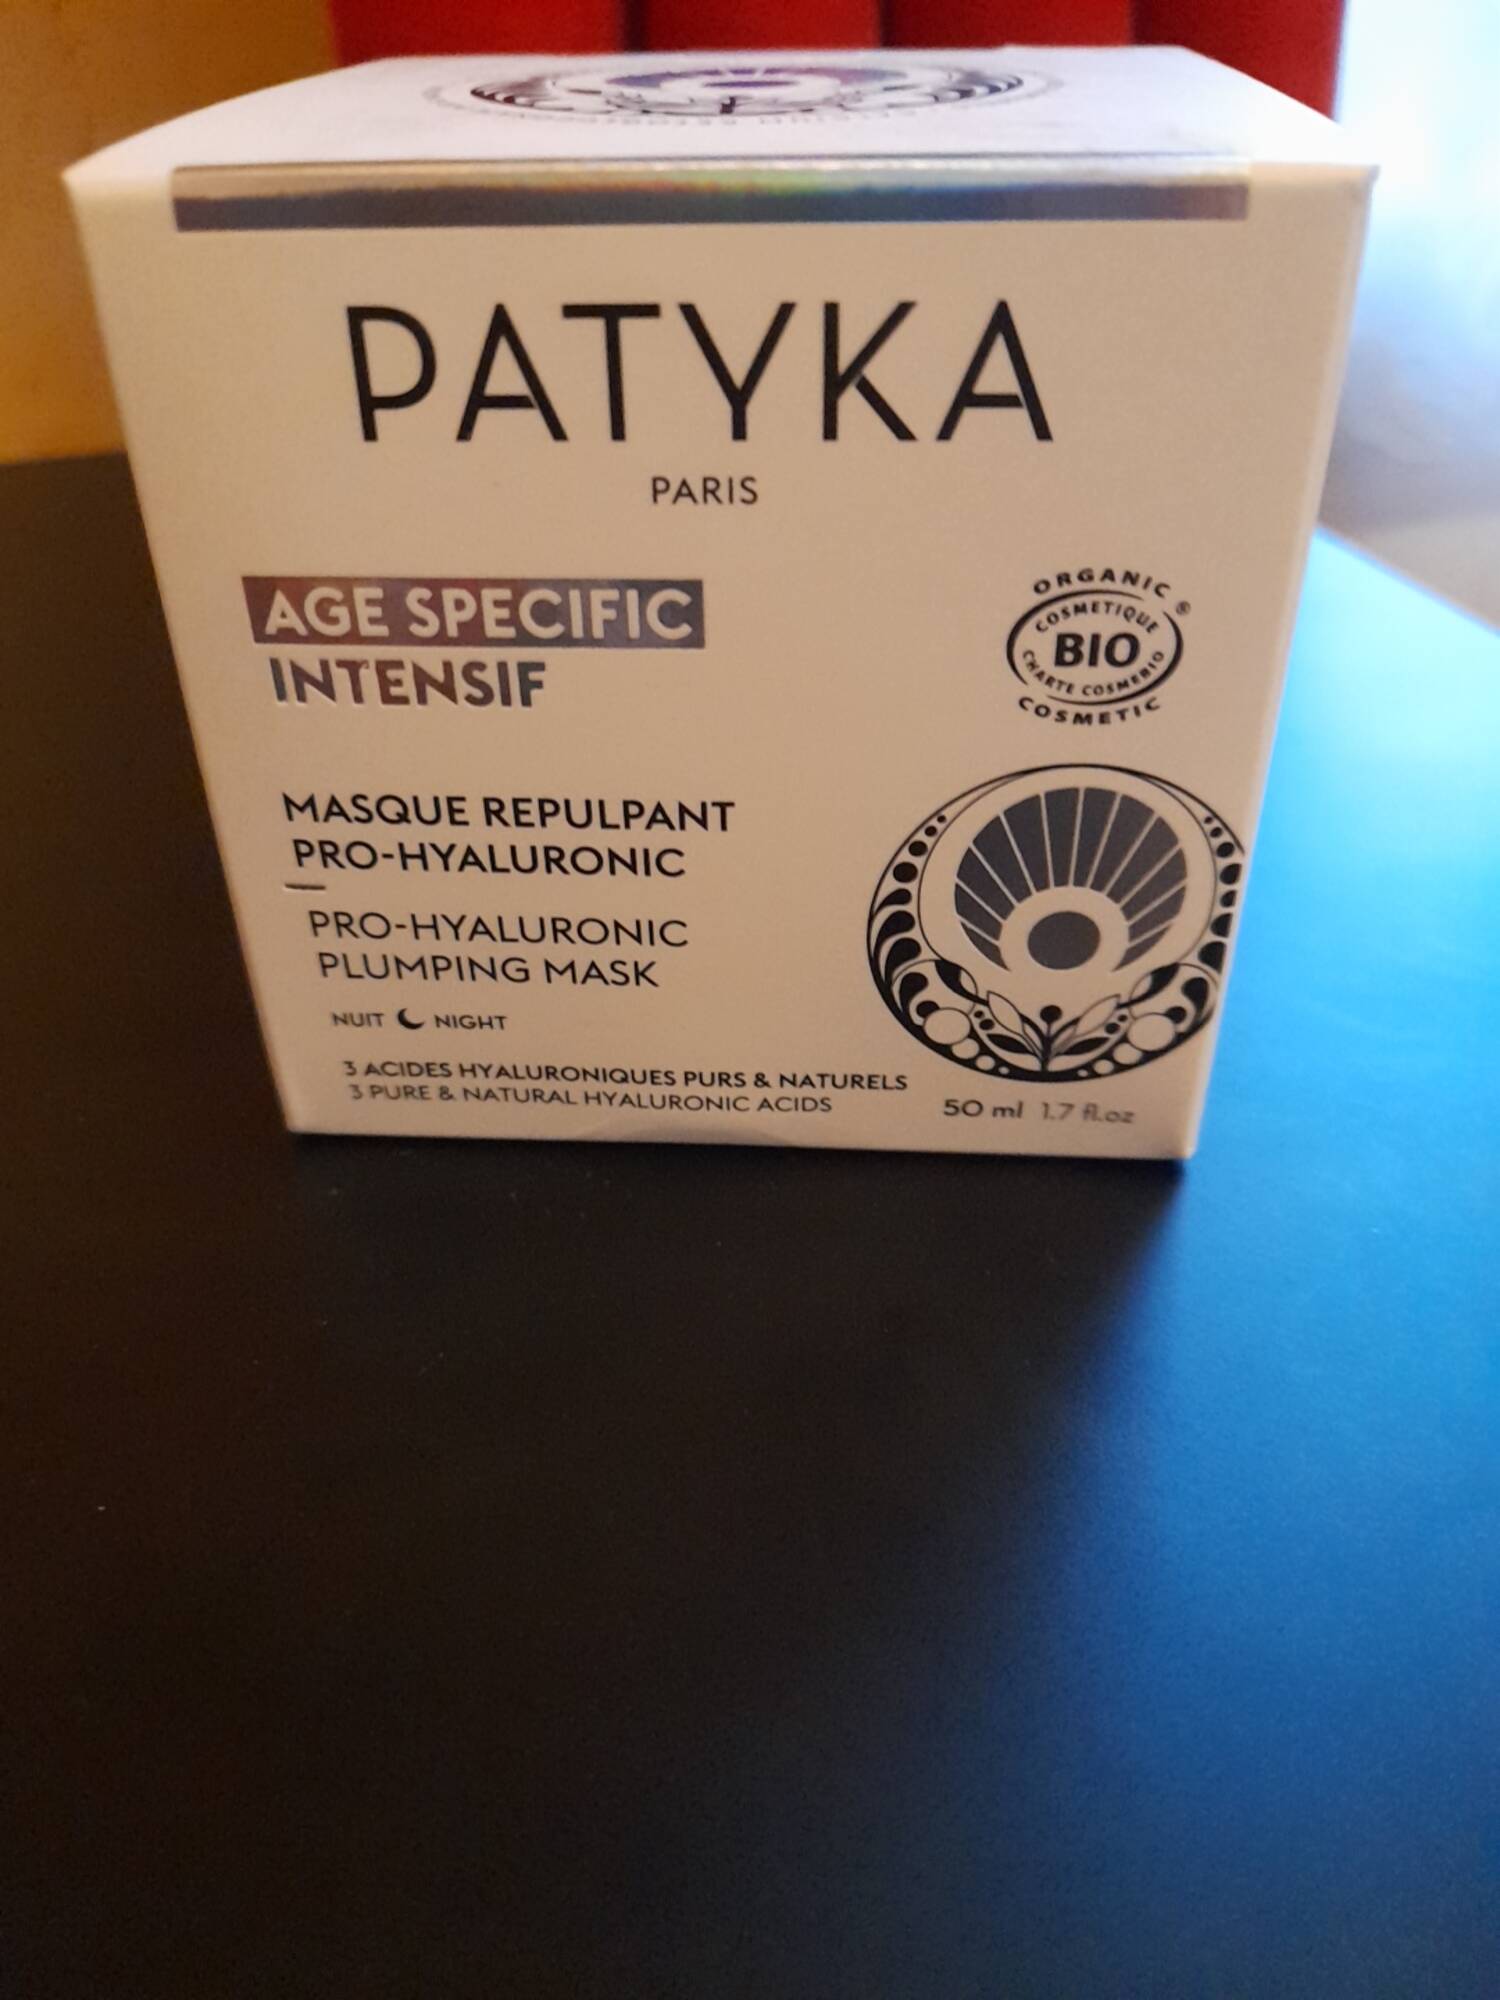 PATYKA - AGE SPECIFIC:Masque repulpant pro-hyaluronic